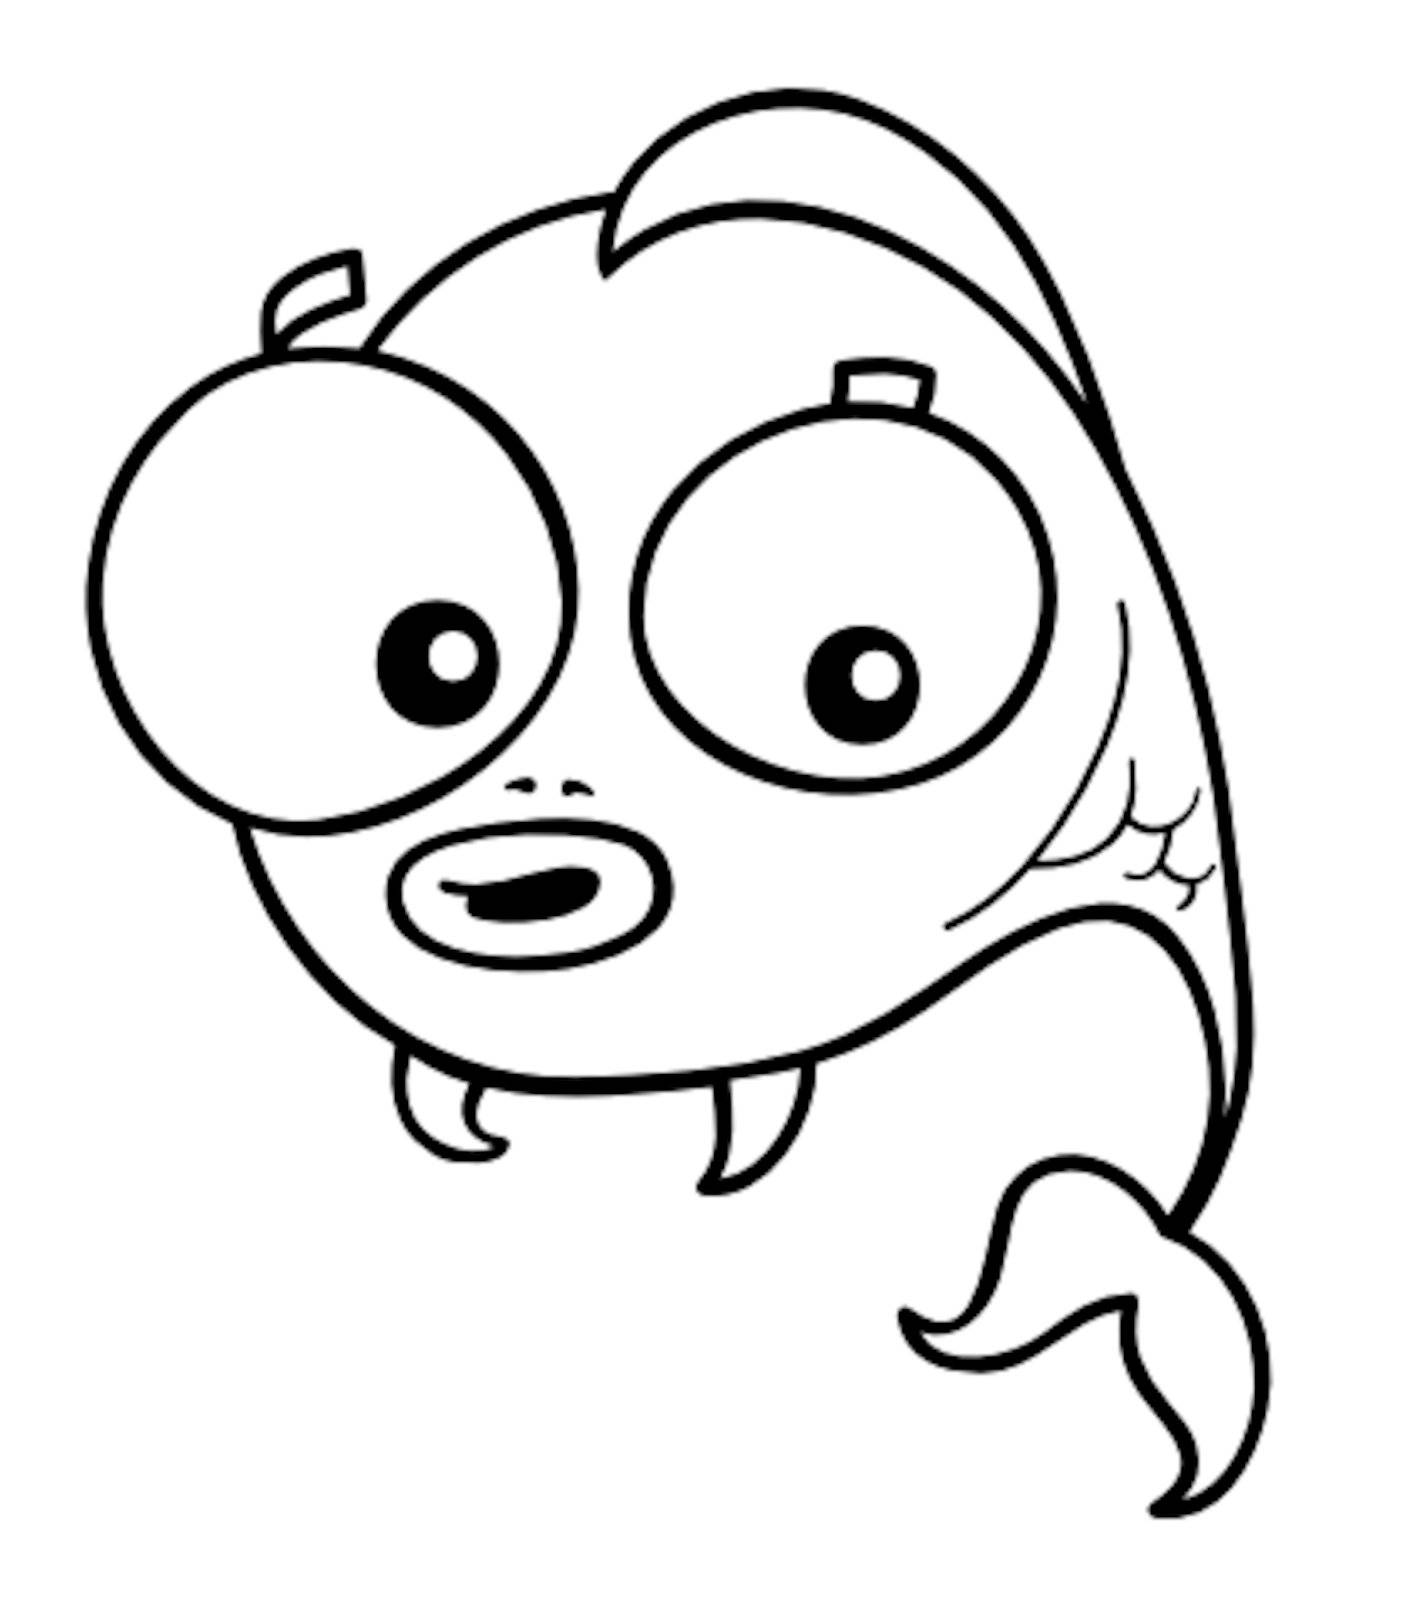 cartoon illustration of cute little fish for coloring book